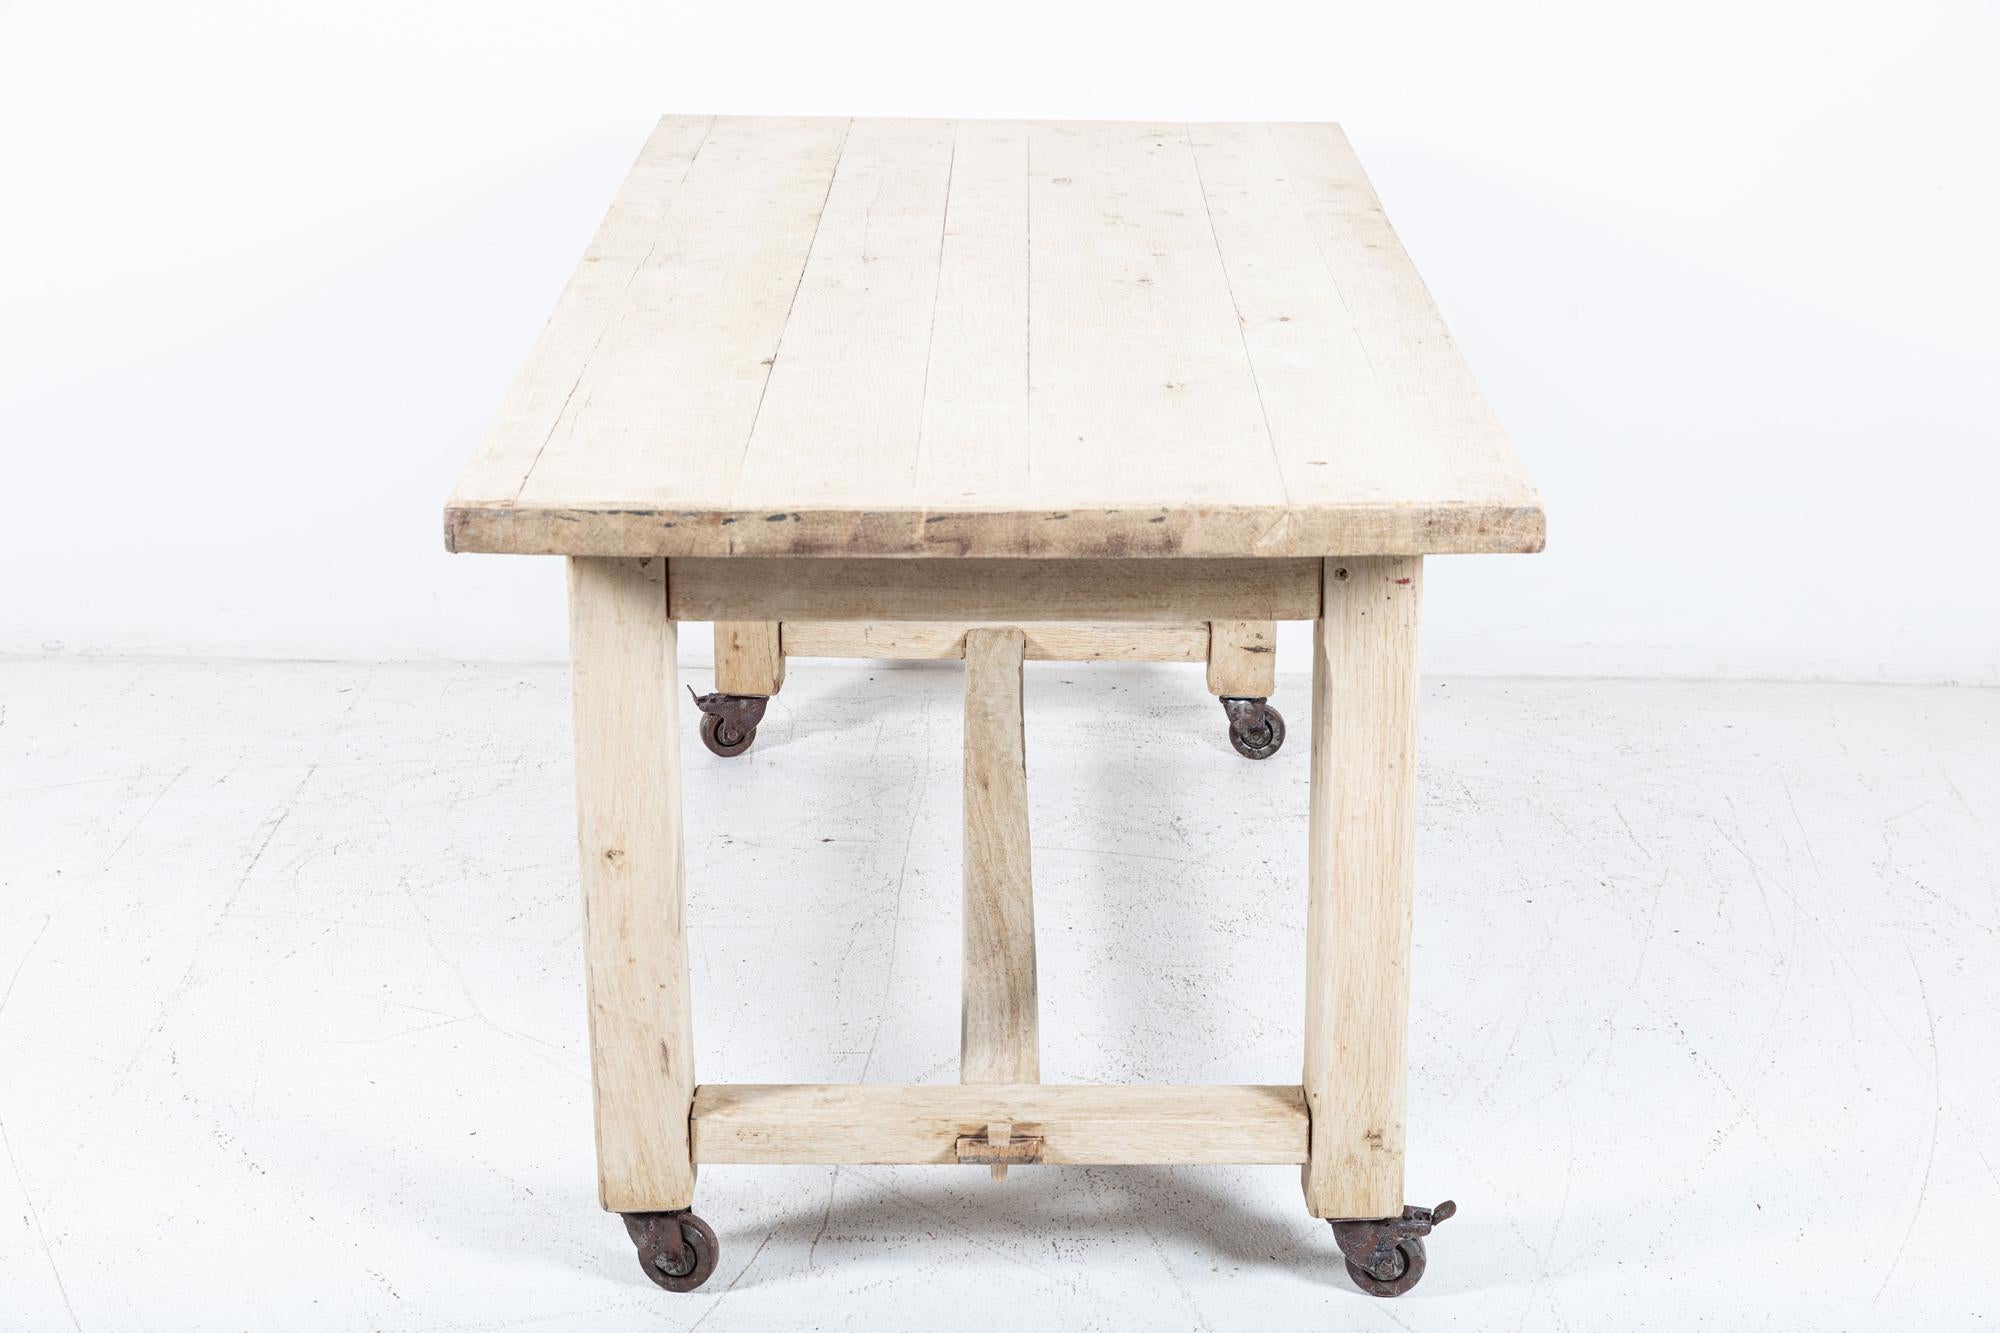 Circa Mid 20thC
French bleached oak table on castors
Sourced from North France
Measures: W180 x D87 x H81 cm.
 